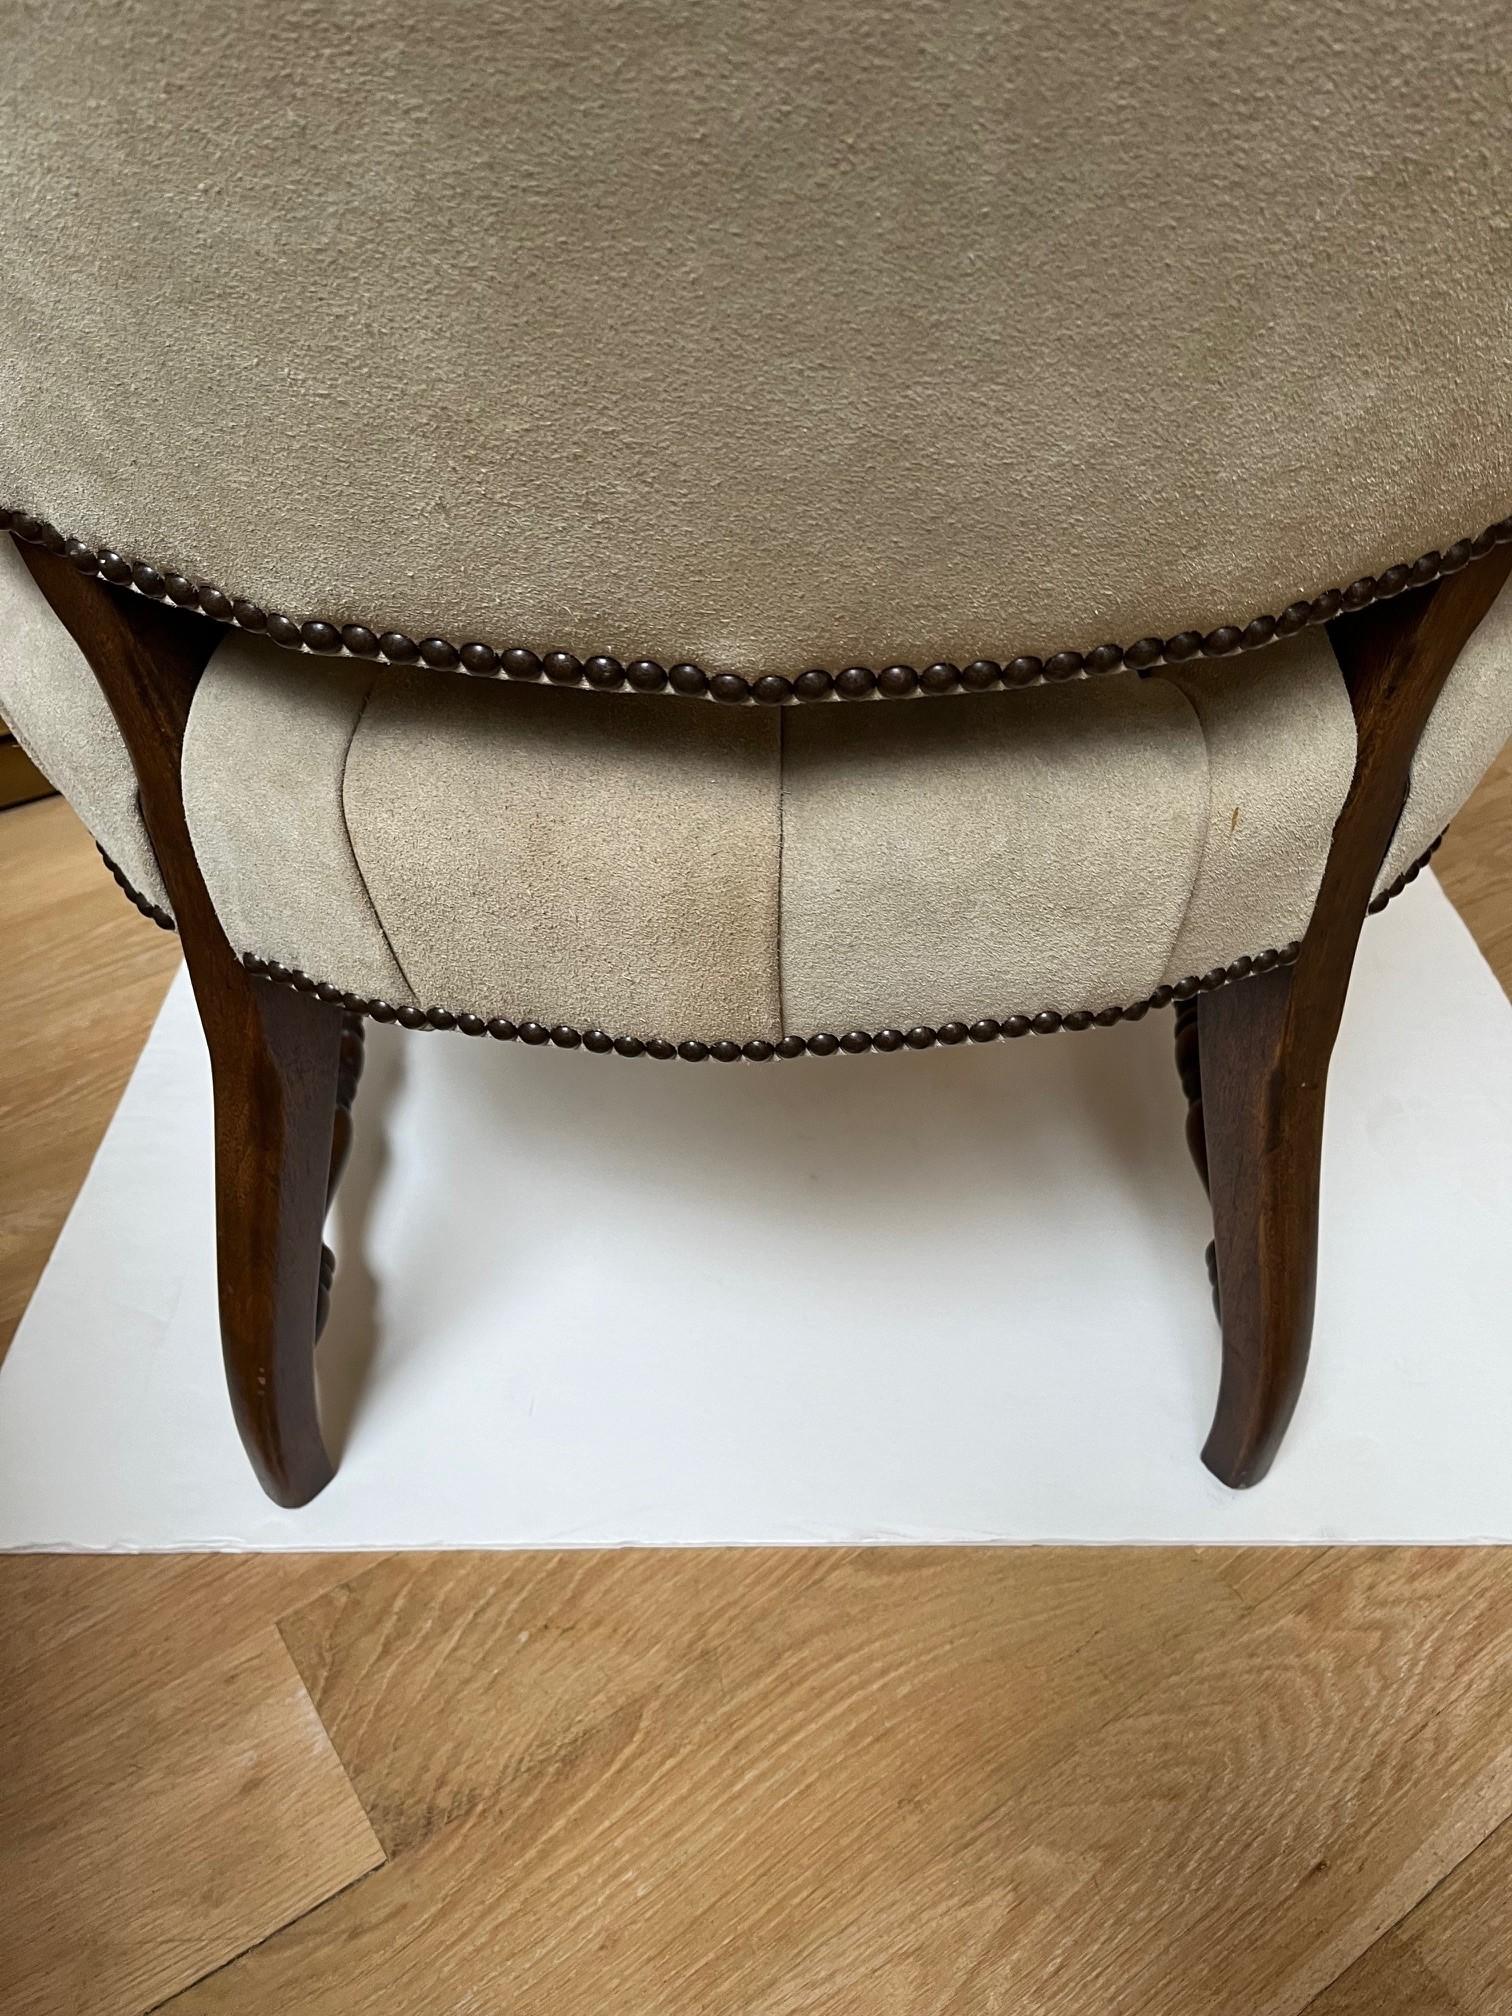 Made to Order Elegant Tufted Seat and Back in Beige Suede Leather Seville Chair For Sale 3